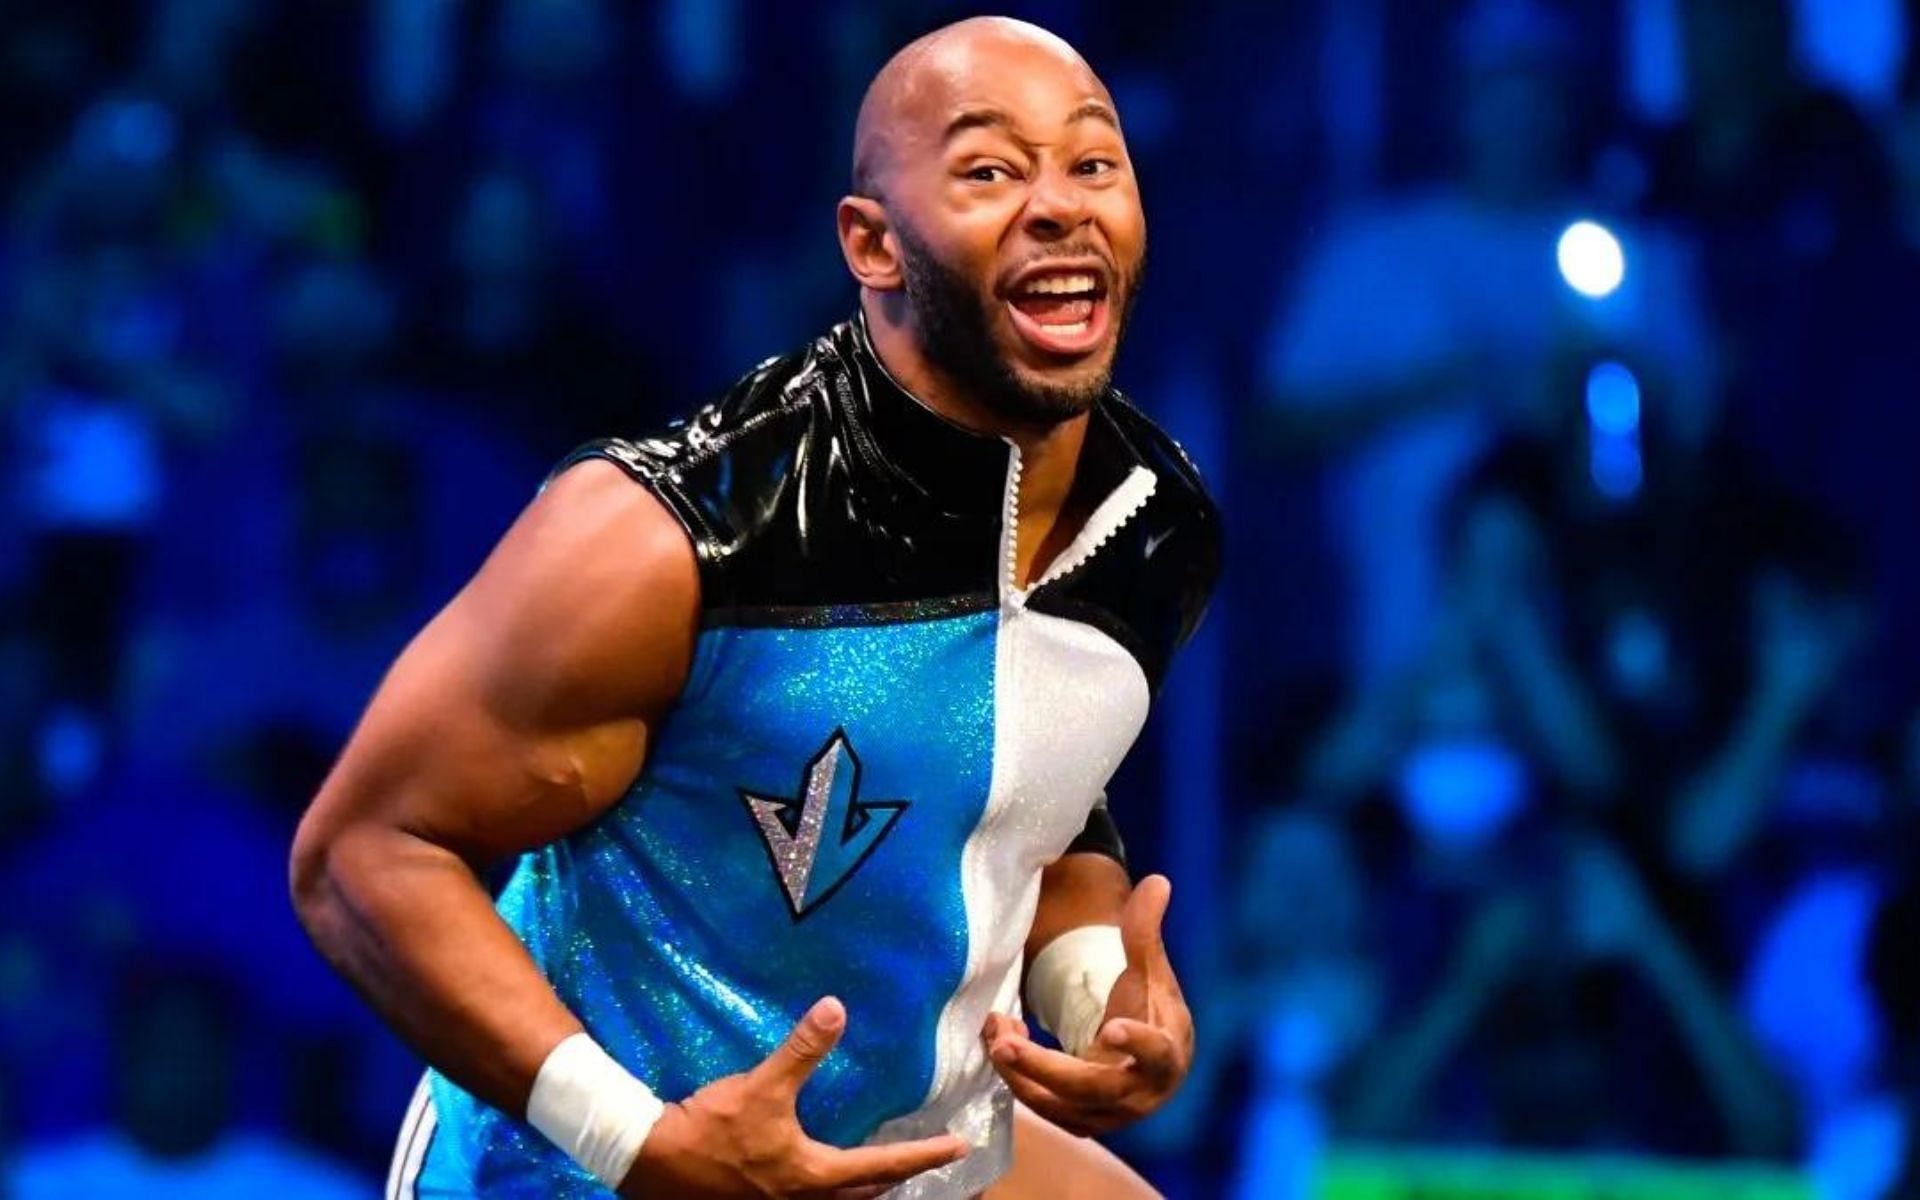 Jay Lethal has accomplished a lot throughout his career!